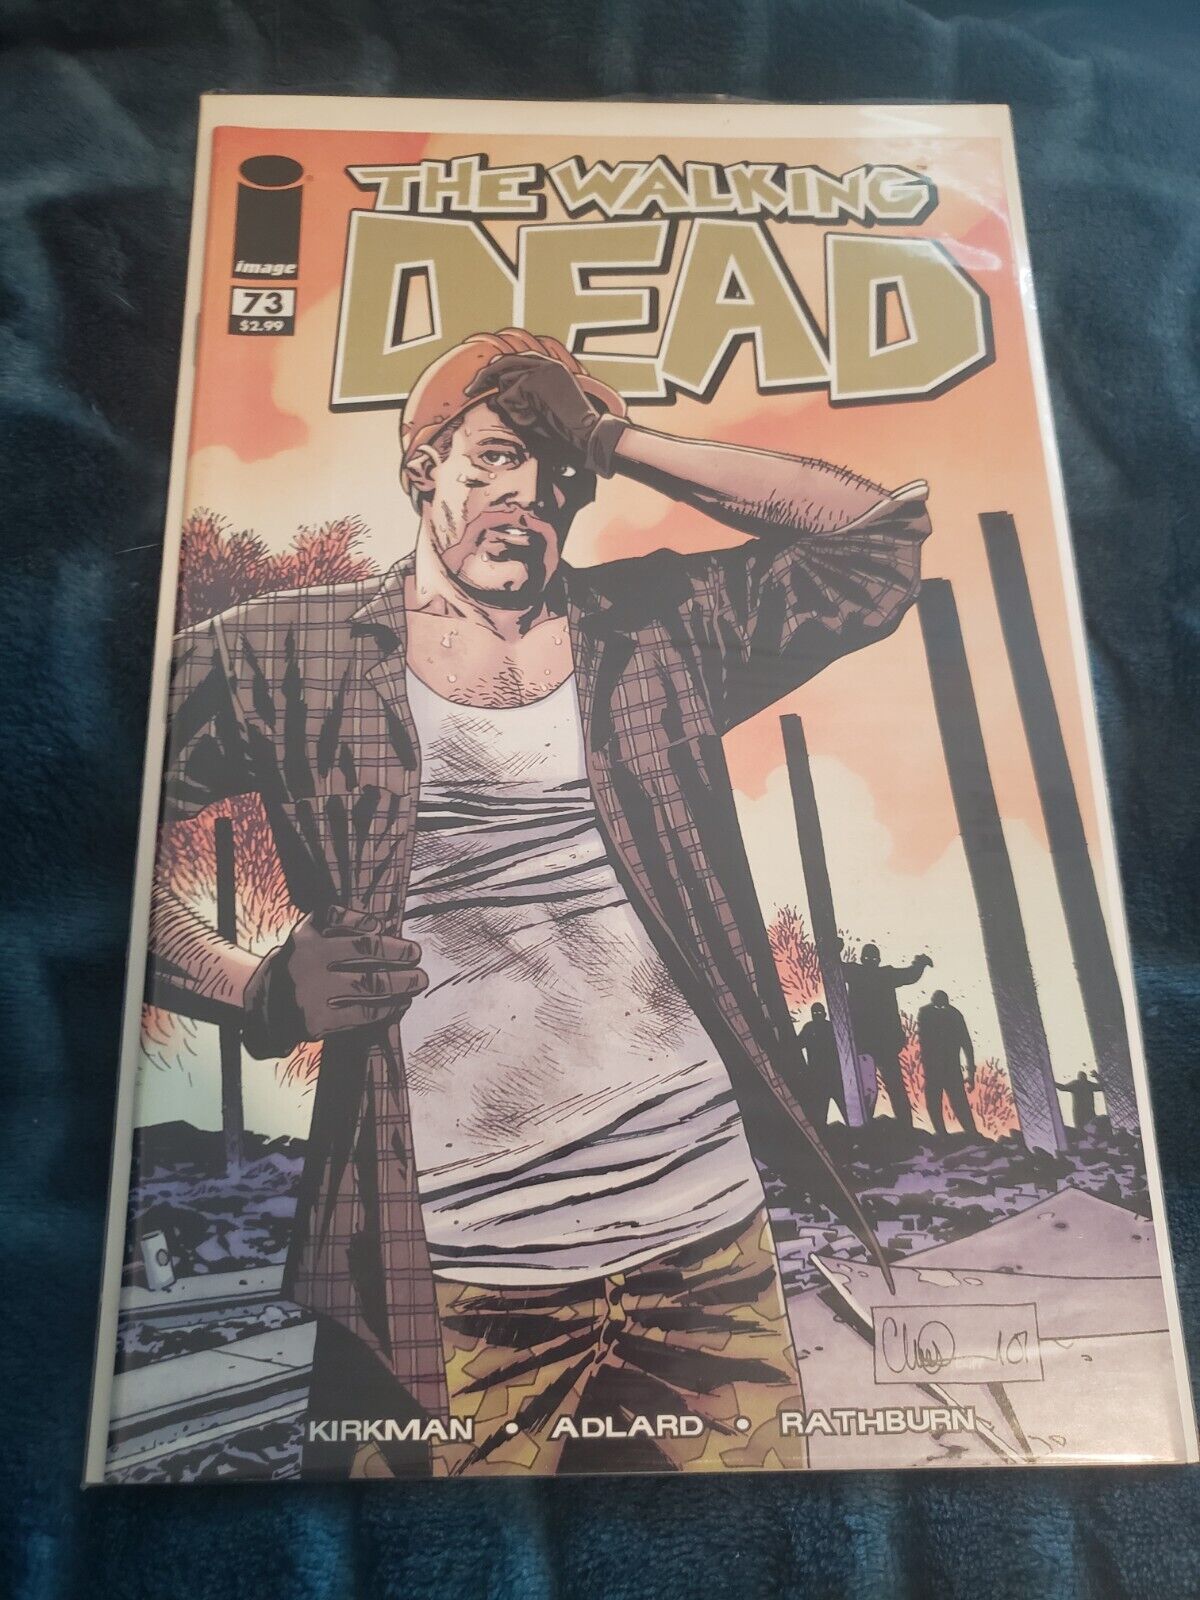 The Walking Dead Issue 73-74 Comic Book Lot